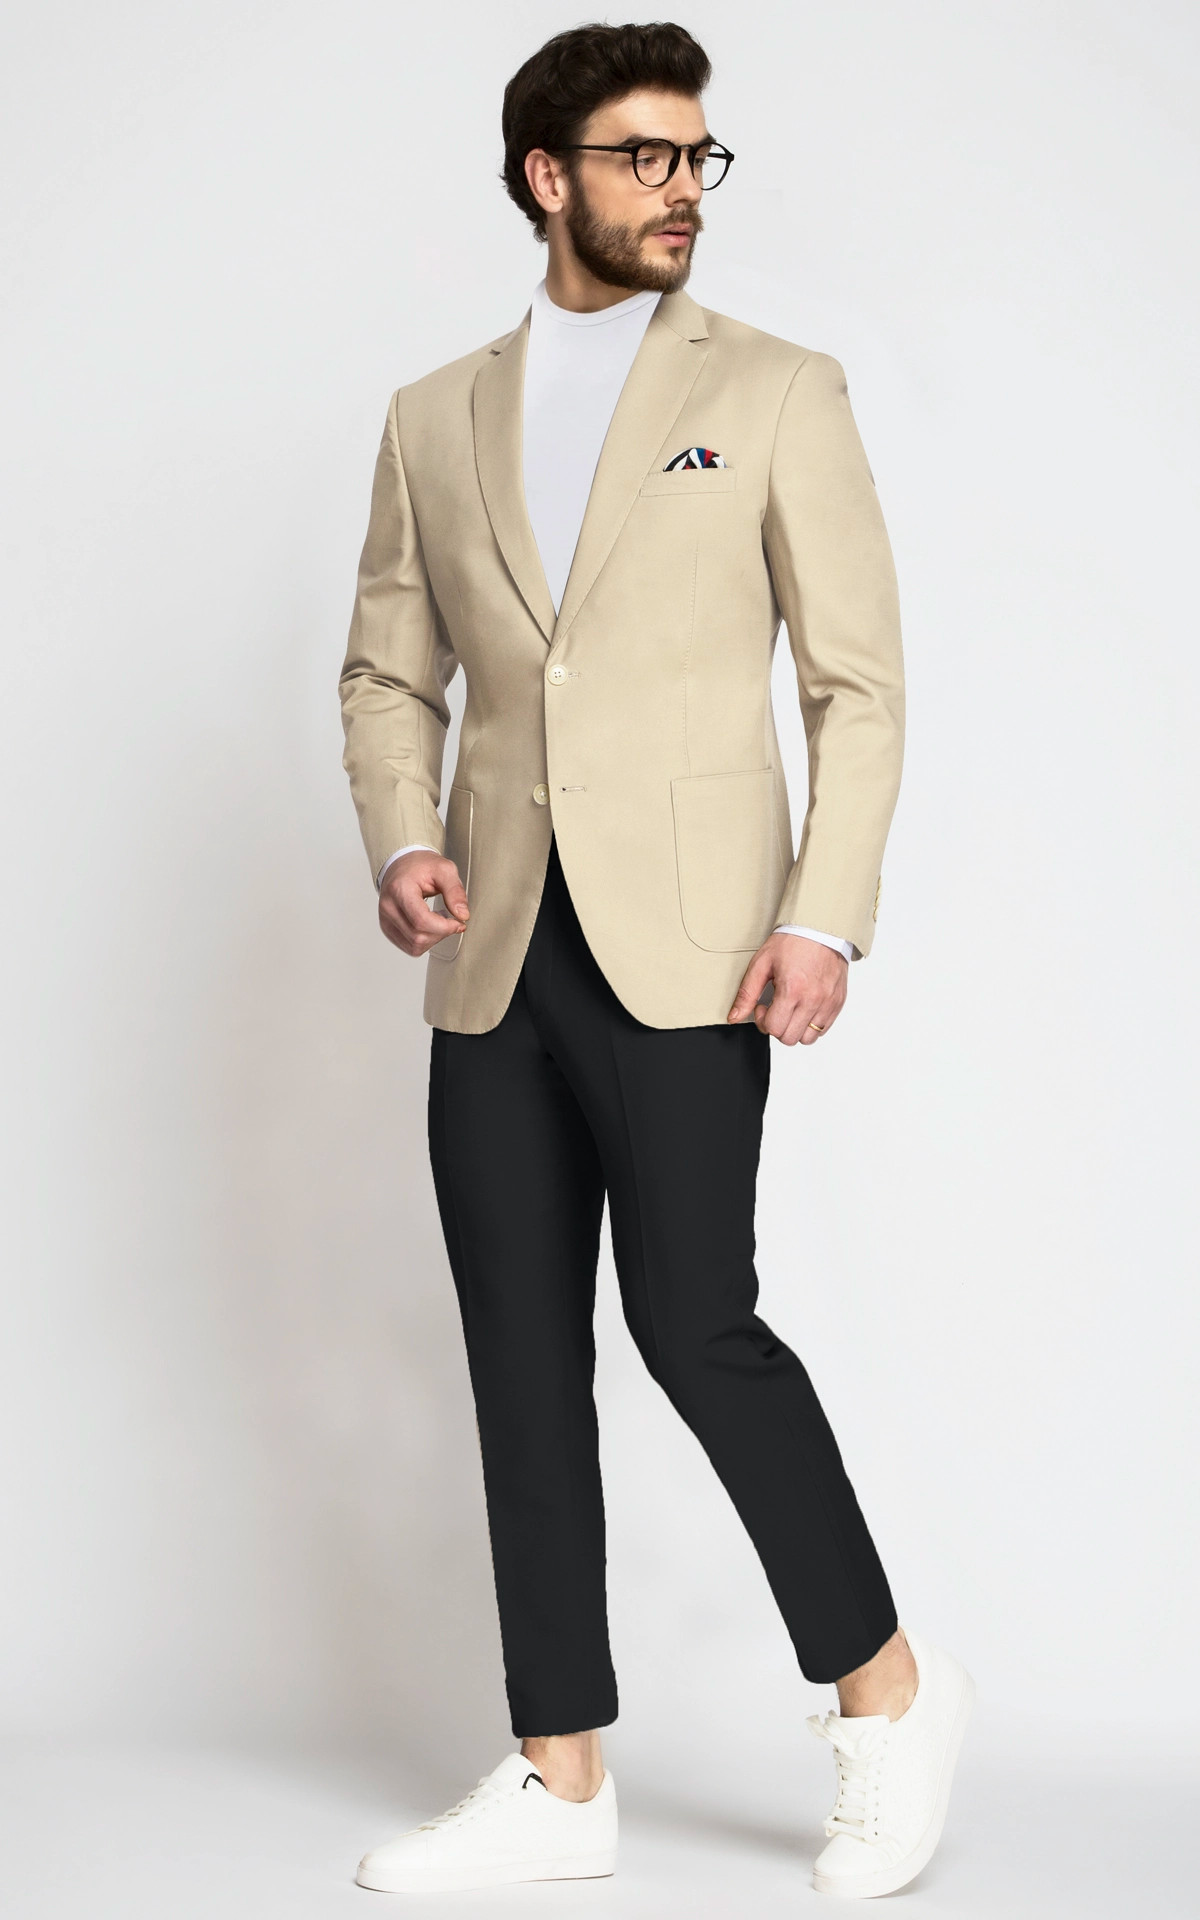 The Most Popular Trending Colors for Men's Suits and Jackets – Samuelsohn